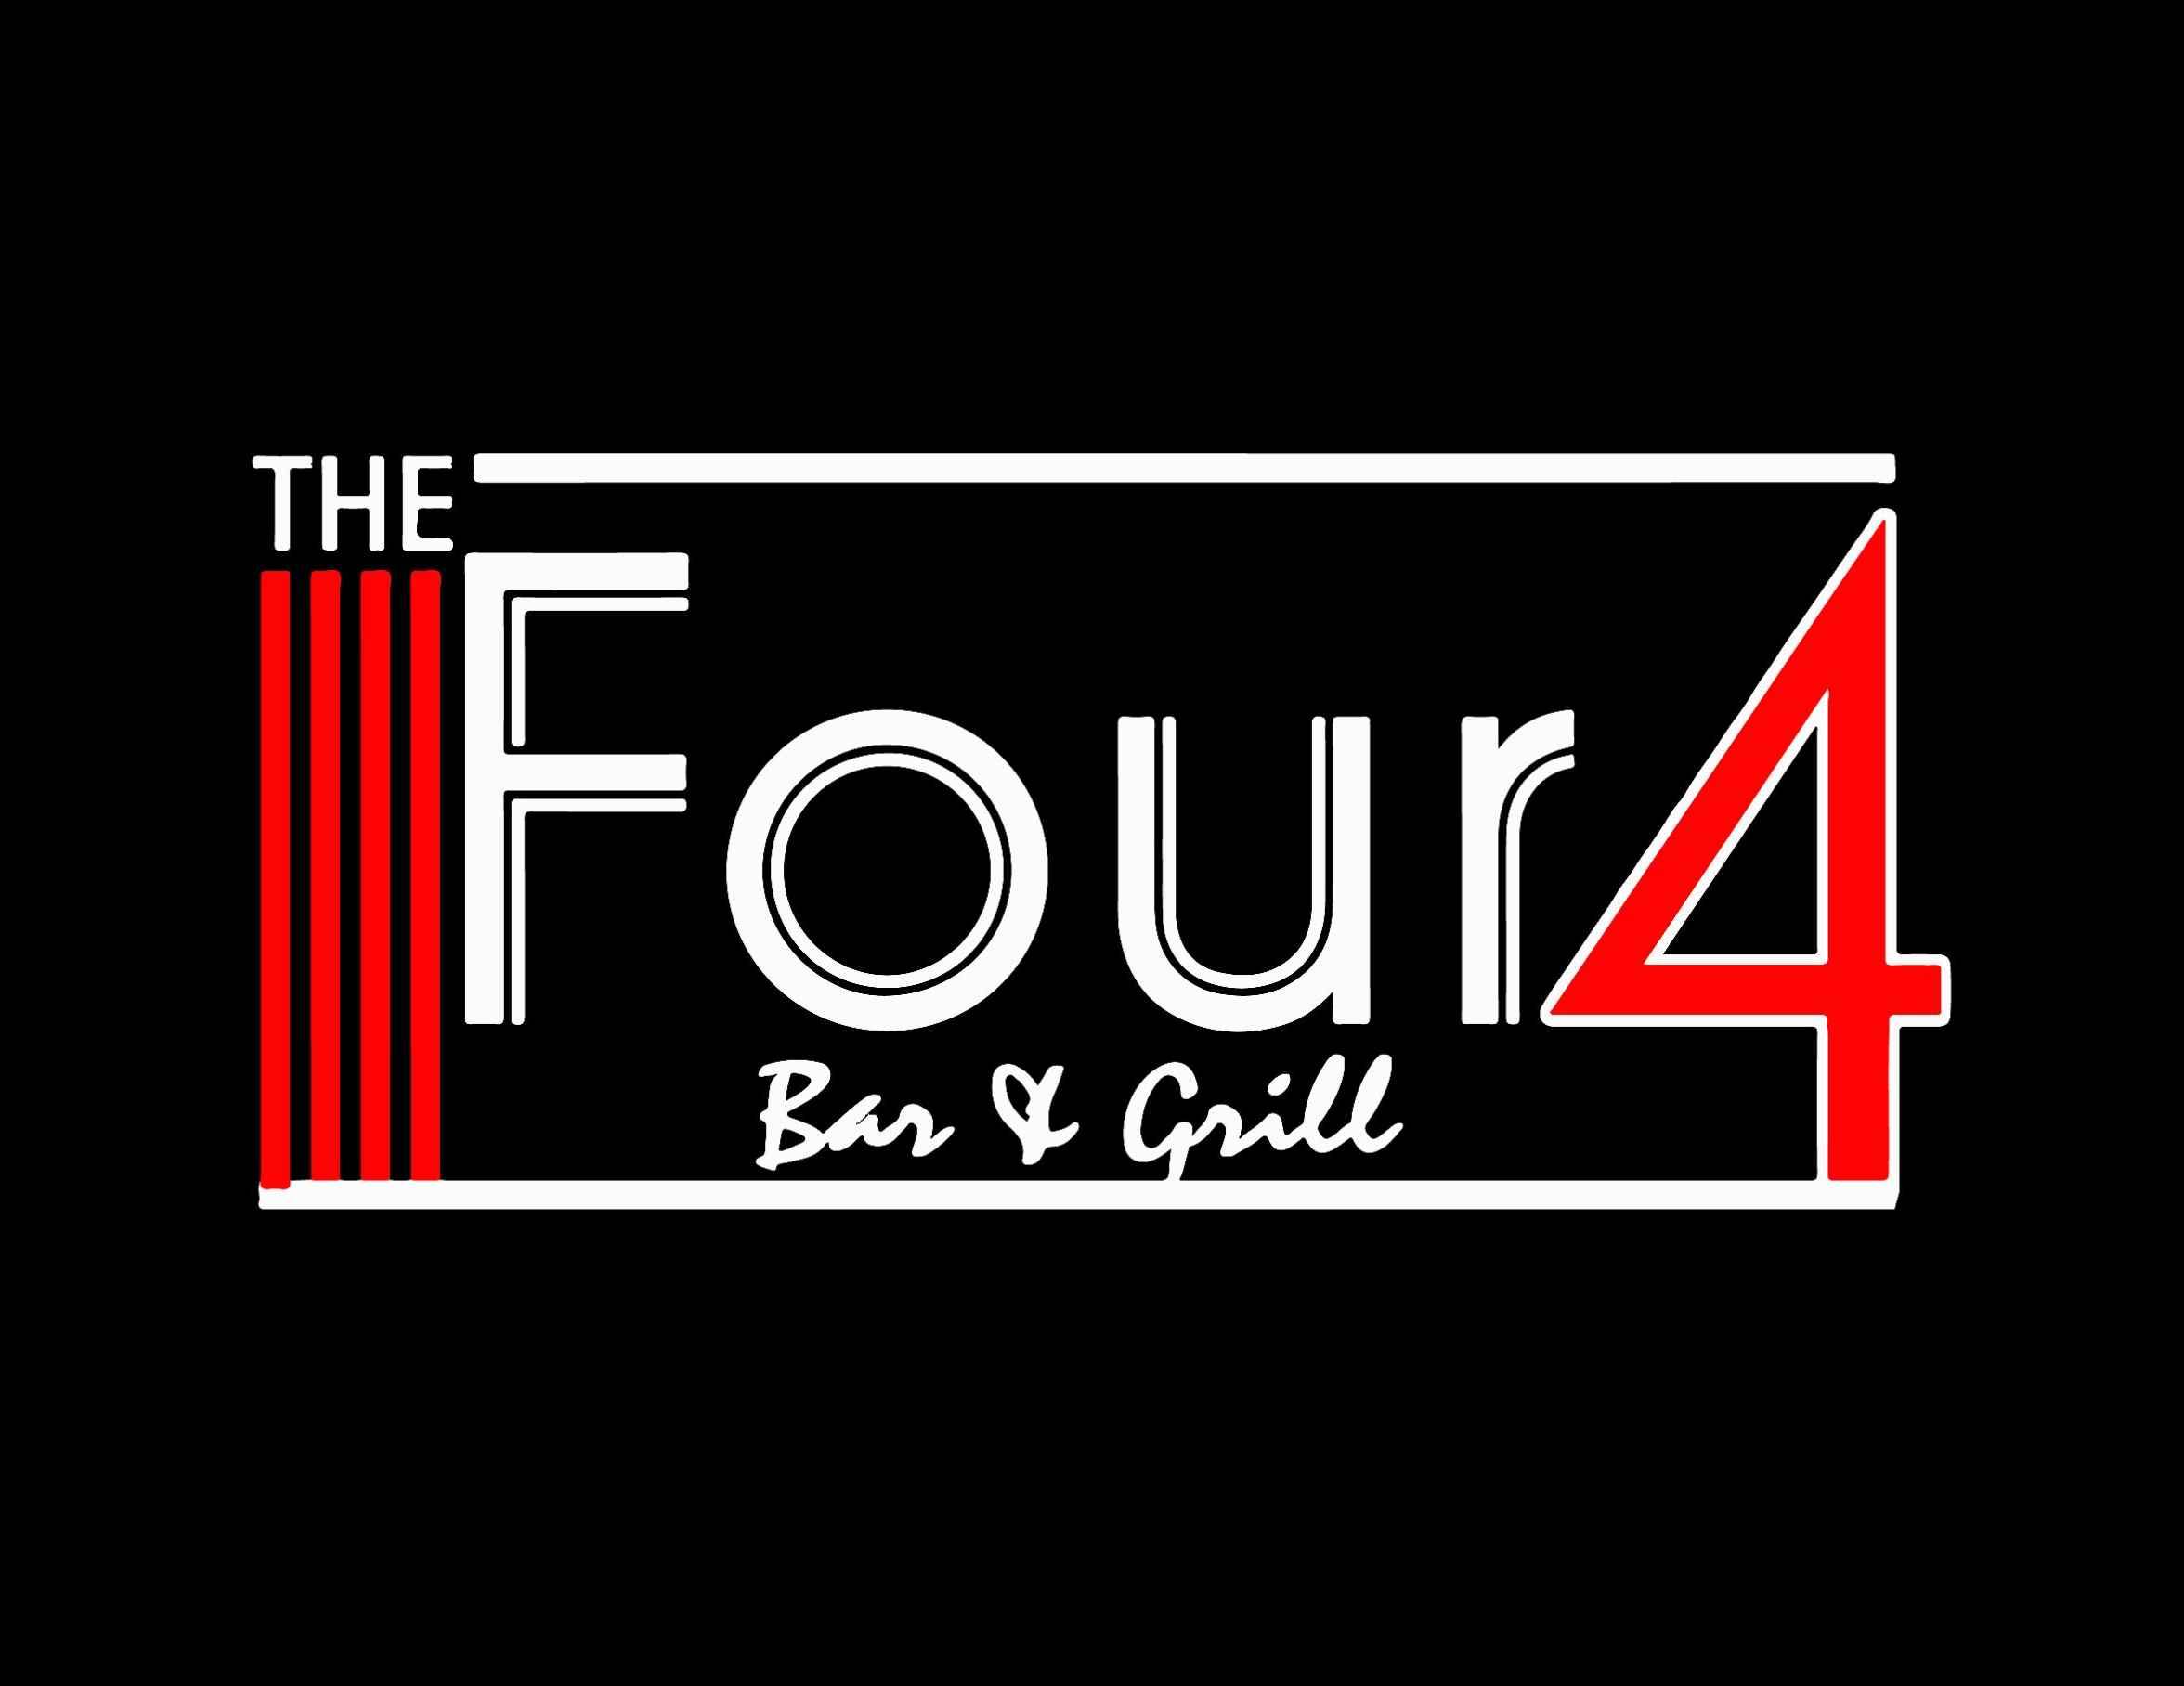 The Four4 Bar & Grill